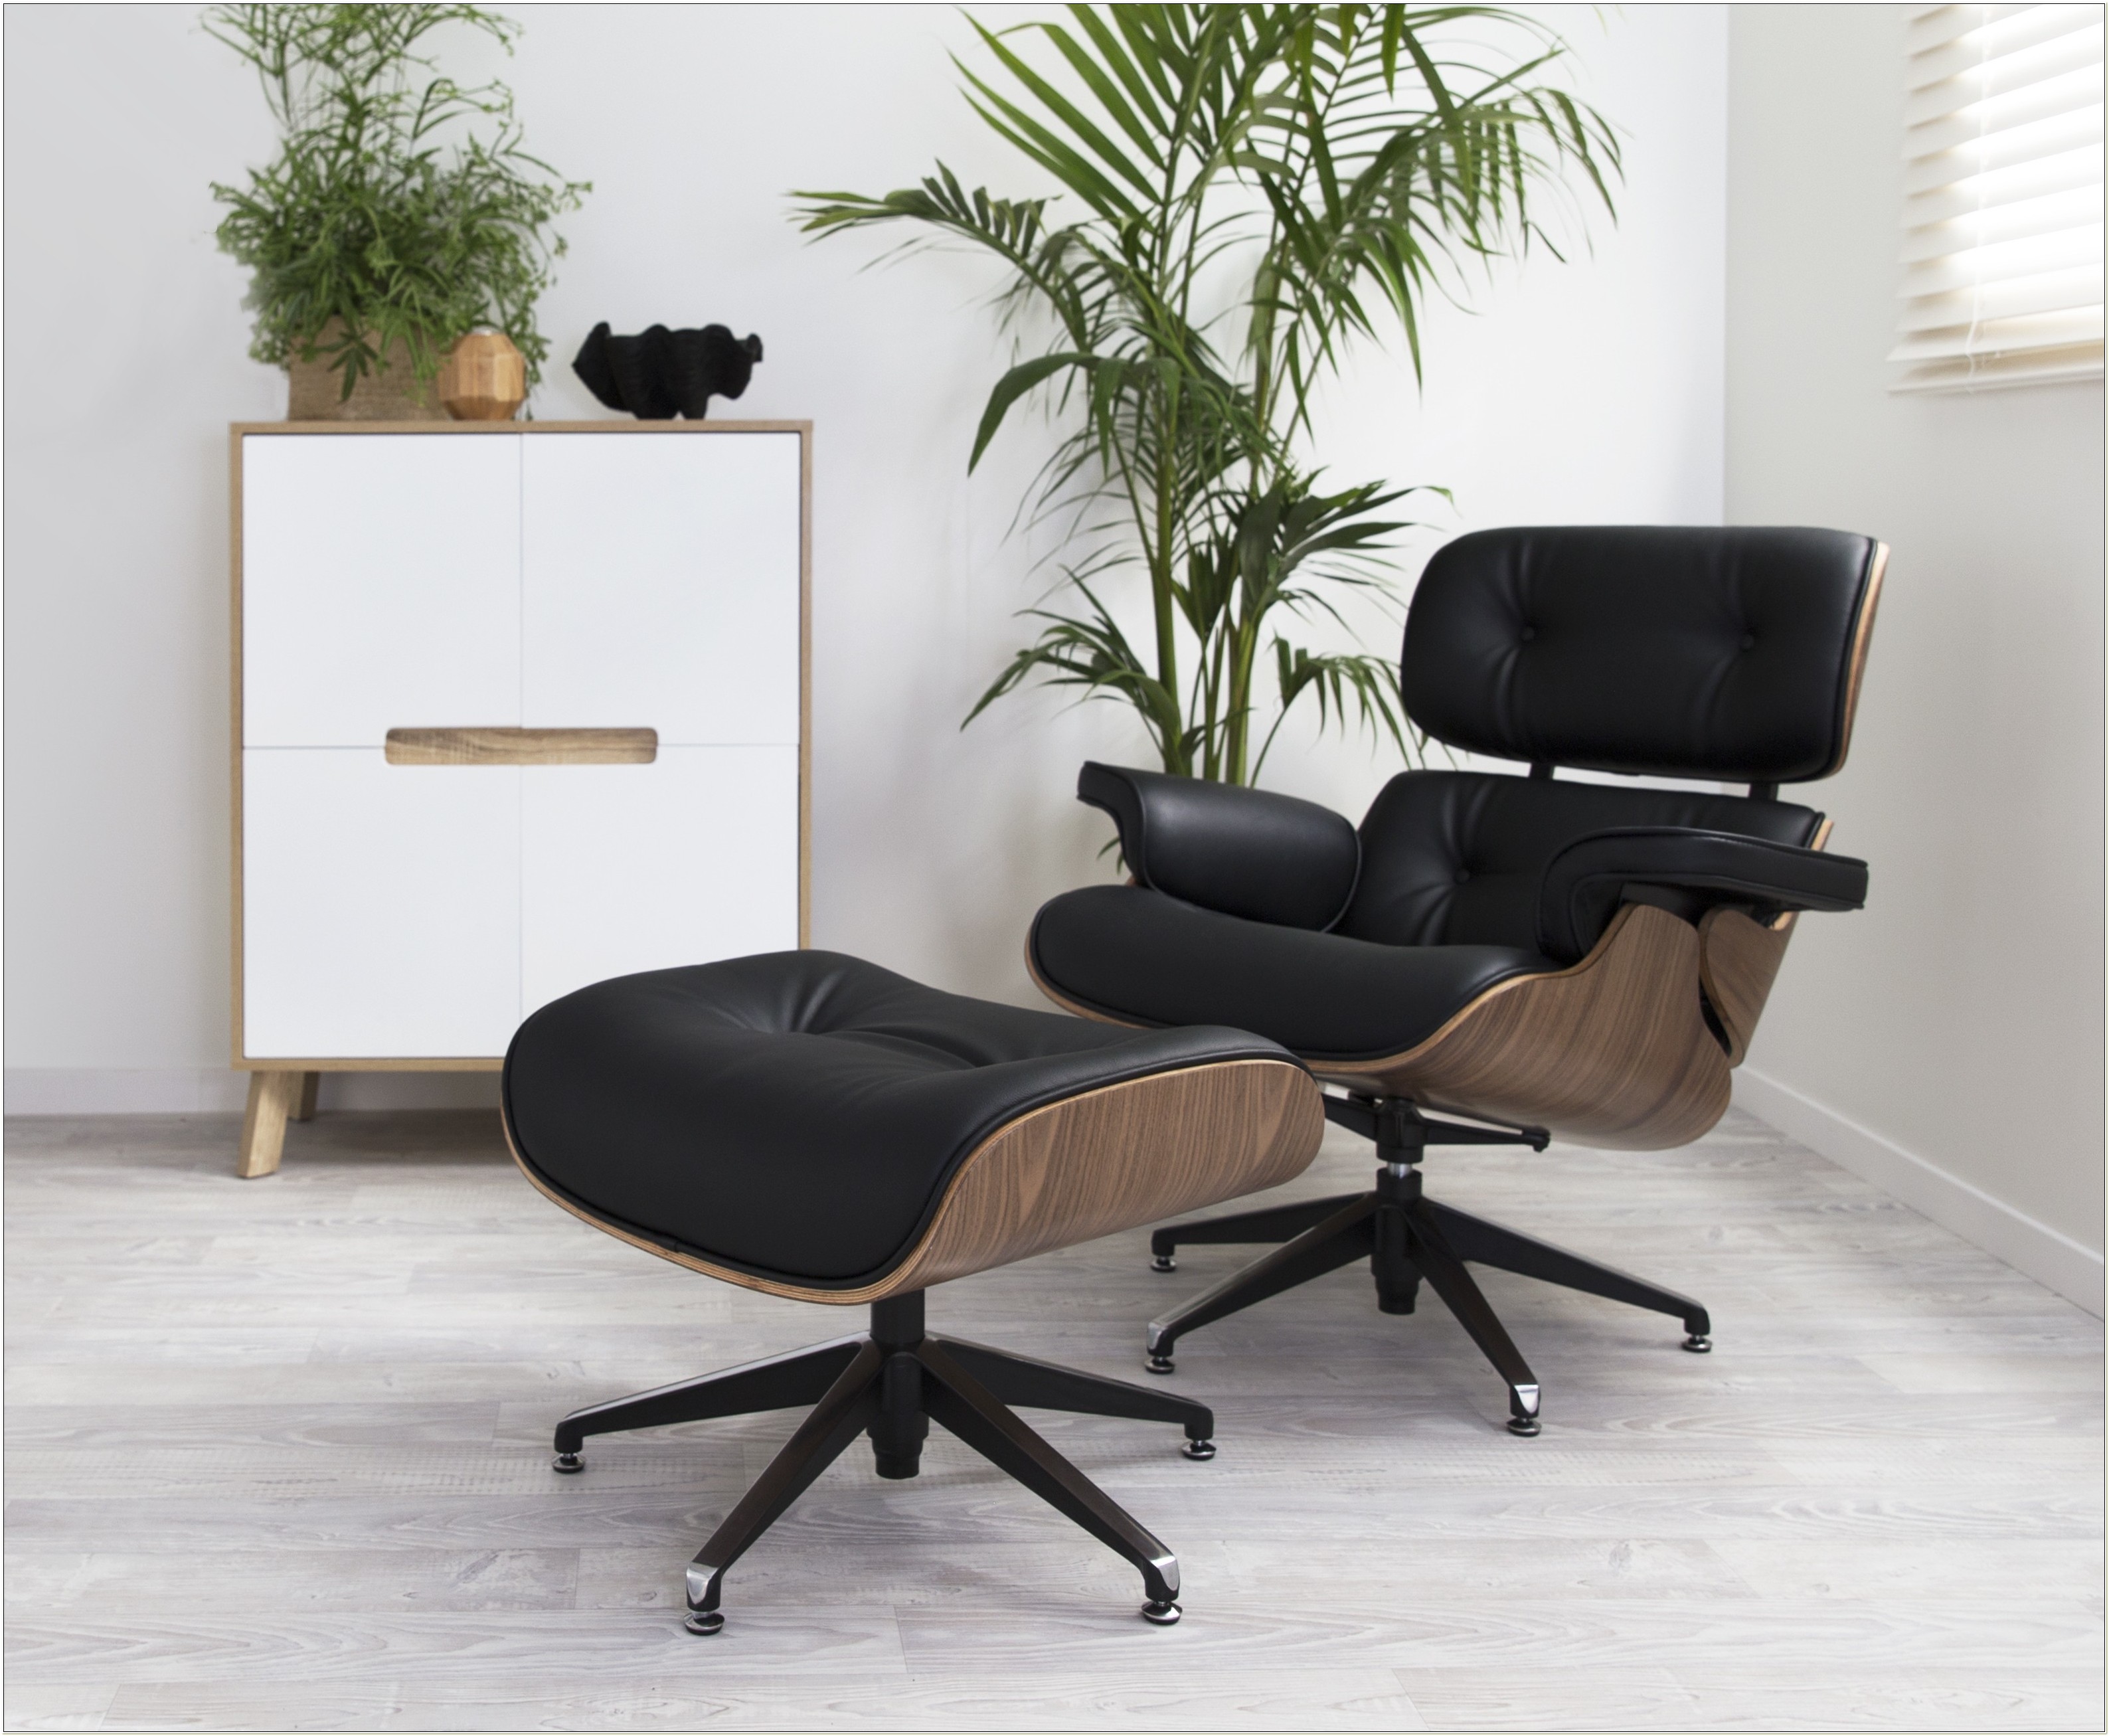 Cheapest Eames Replica Chairs - Chairs : Home Decorating Ideas #0R6Kd13l38